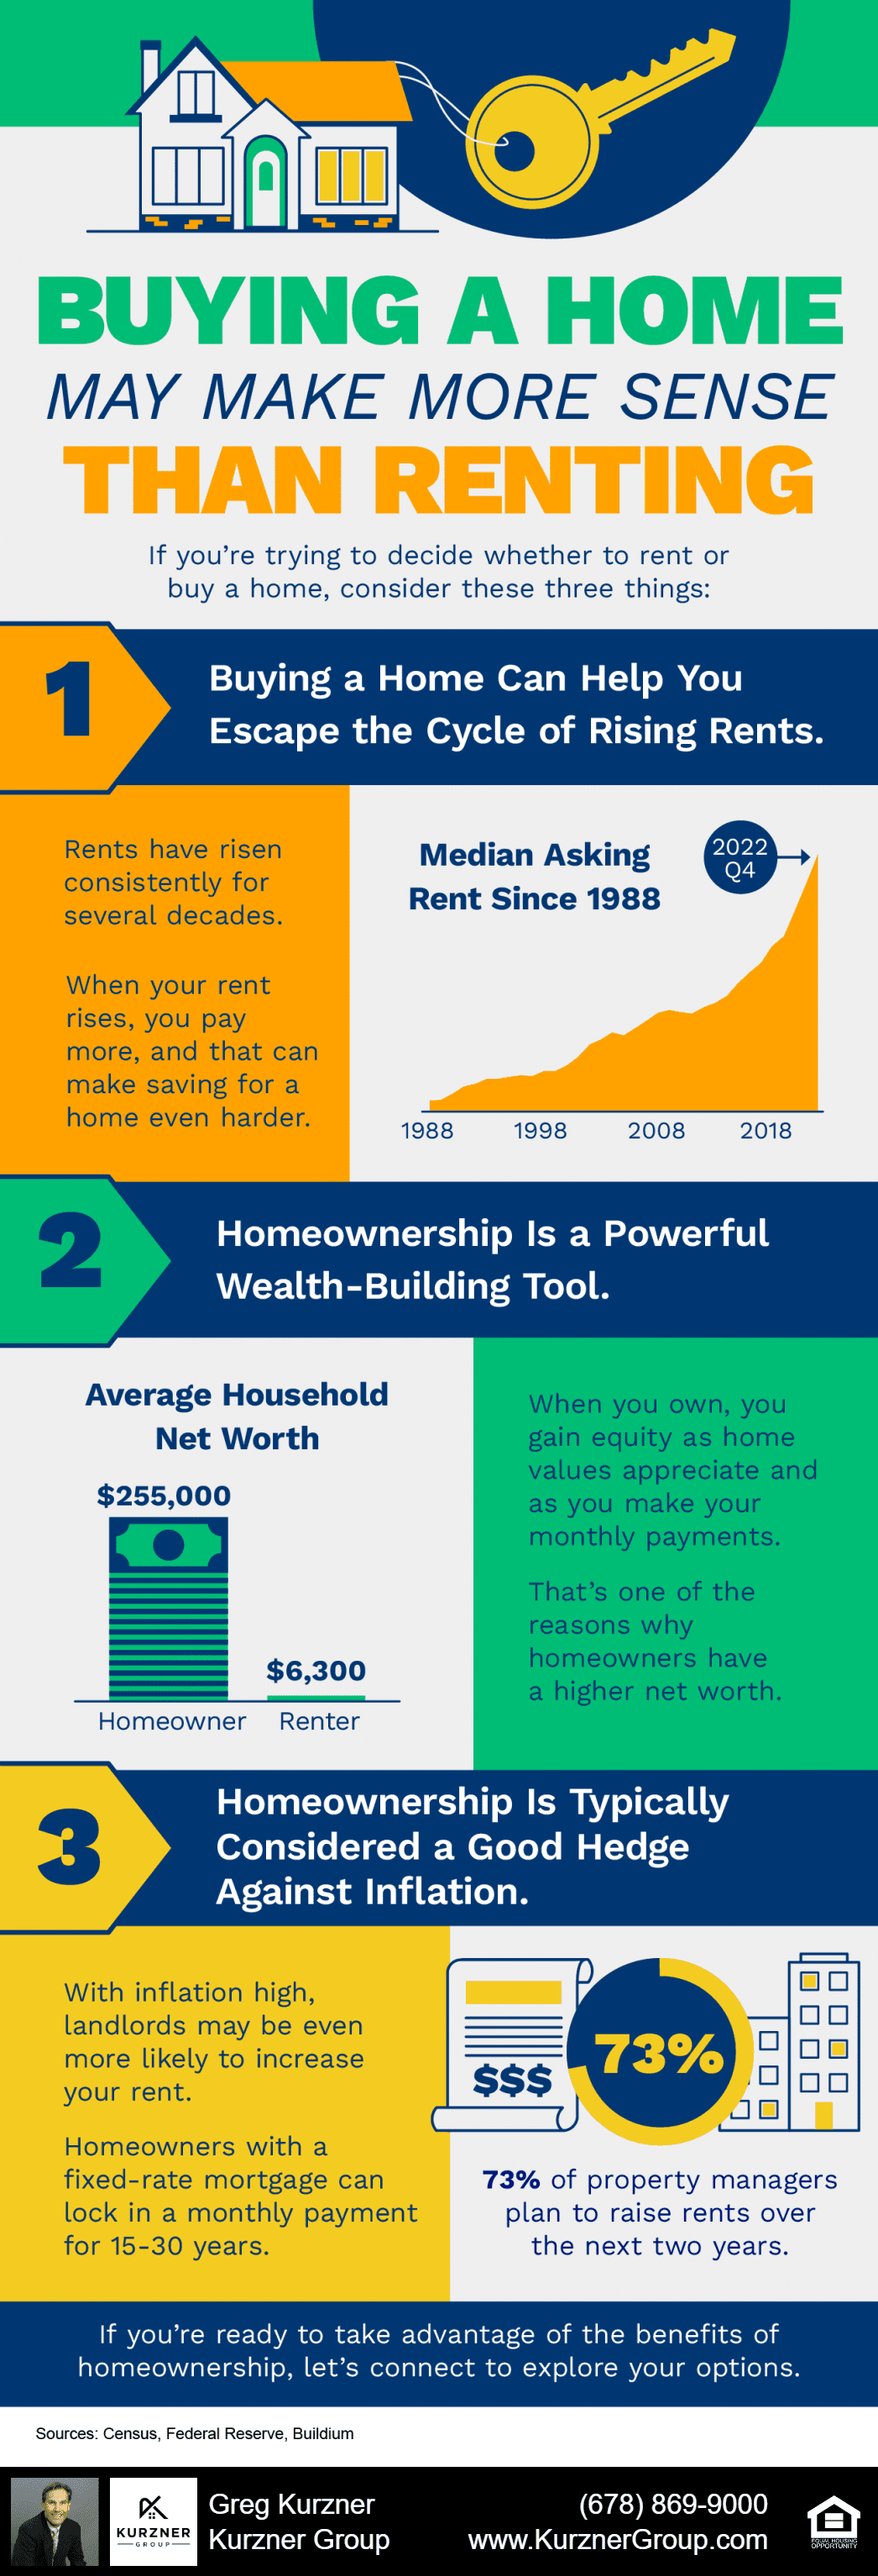 Buying a Home May Make More Sense Than Renting [INFOGRAPHIC]